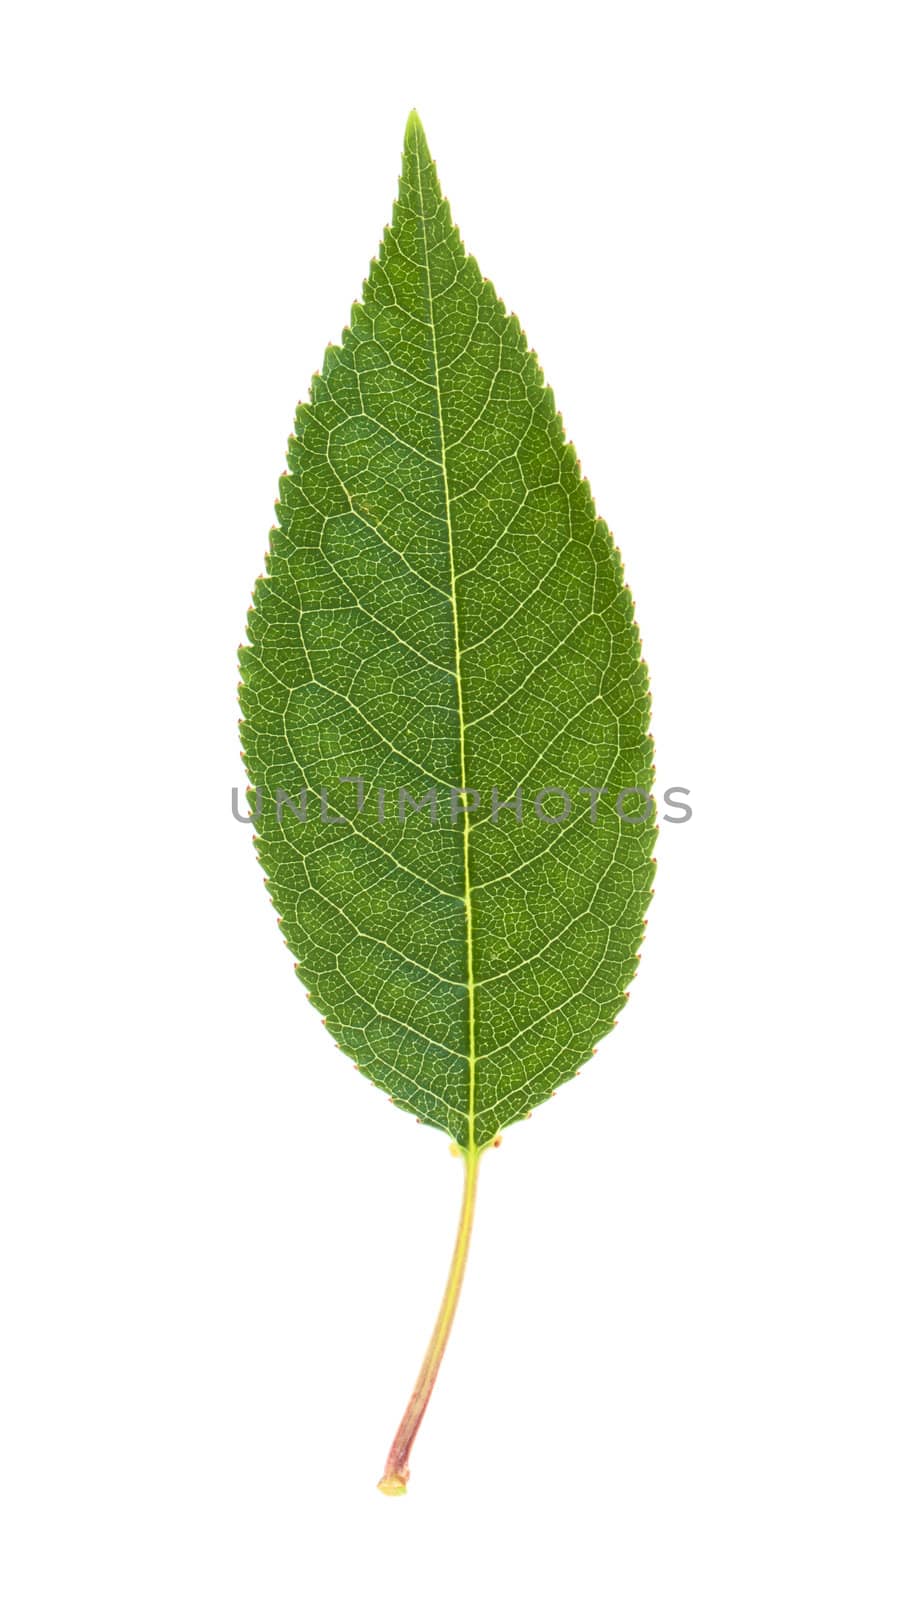 Cherry leaf isolated on white